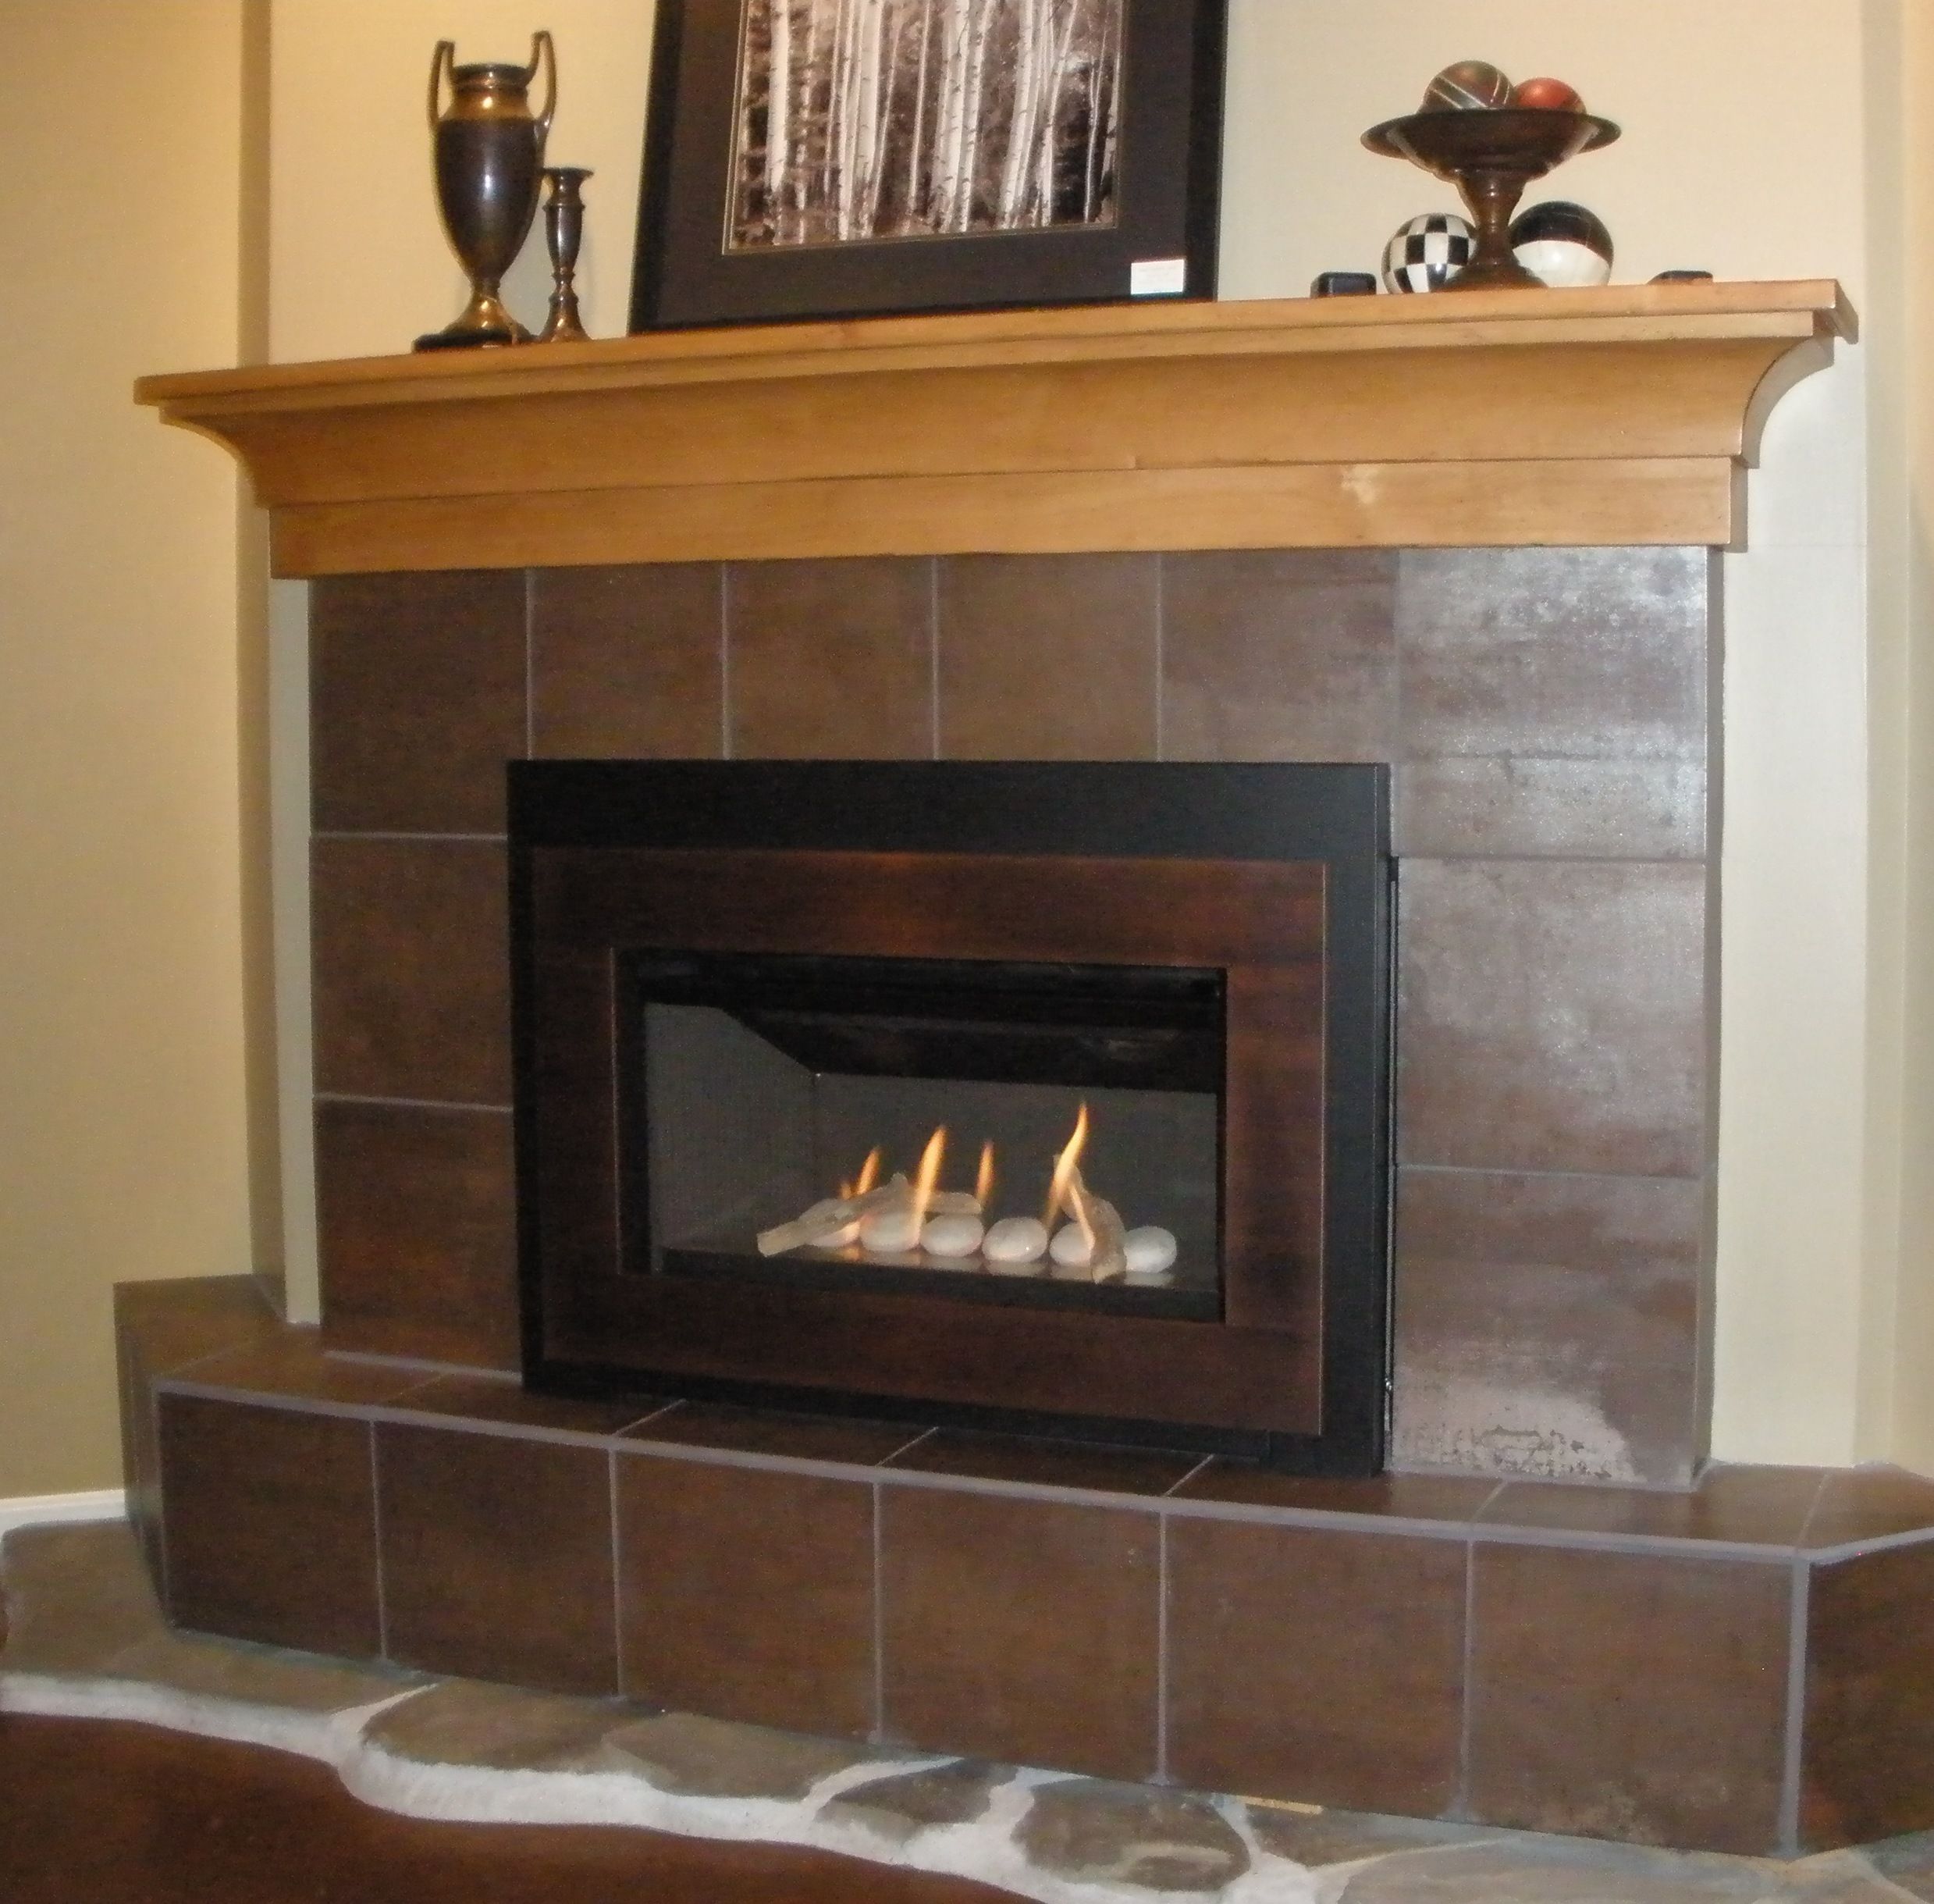 Contemporary Gas Fireplace Insert Inspirational Pin On Valor Radiant Gas Fireplaces Midwest Dealer